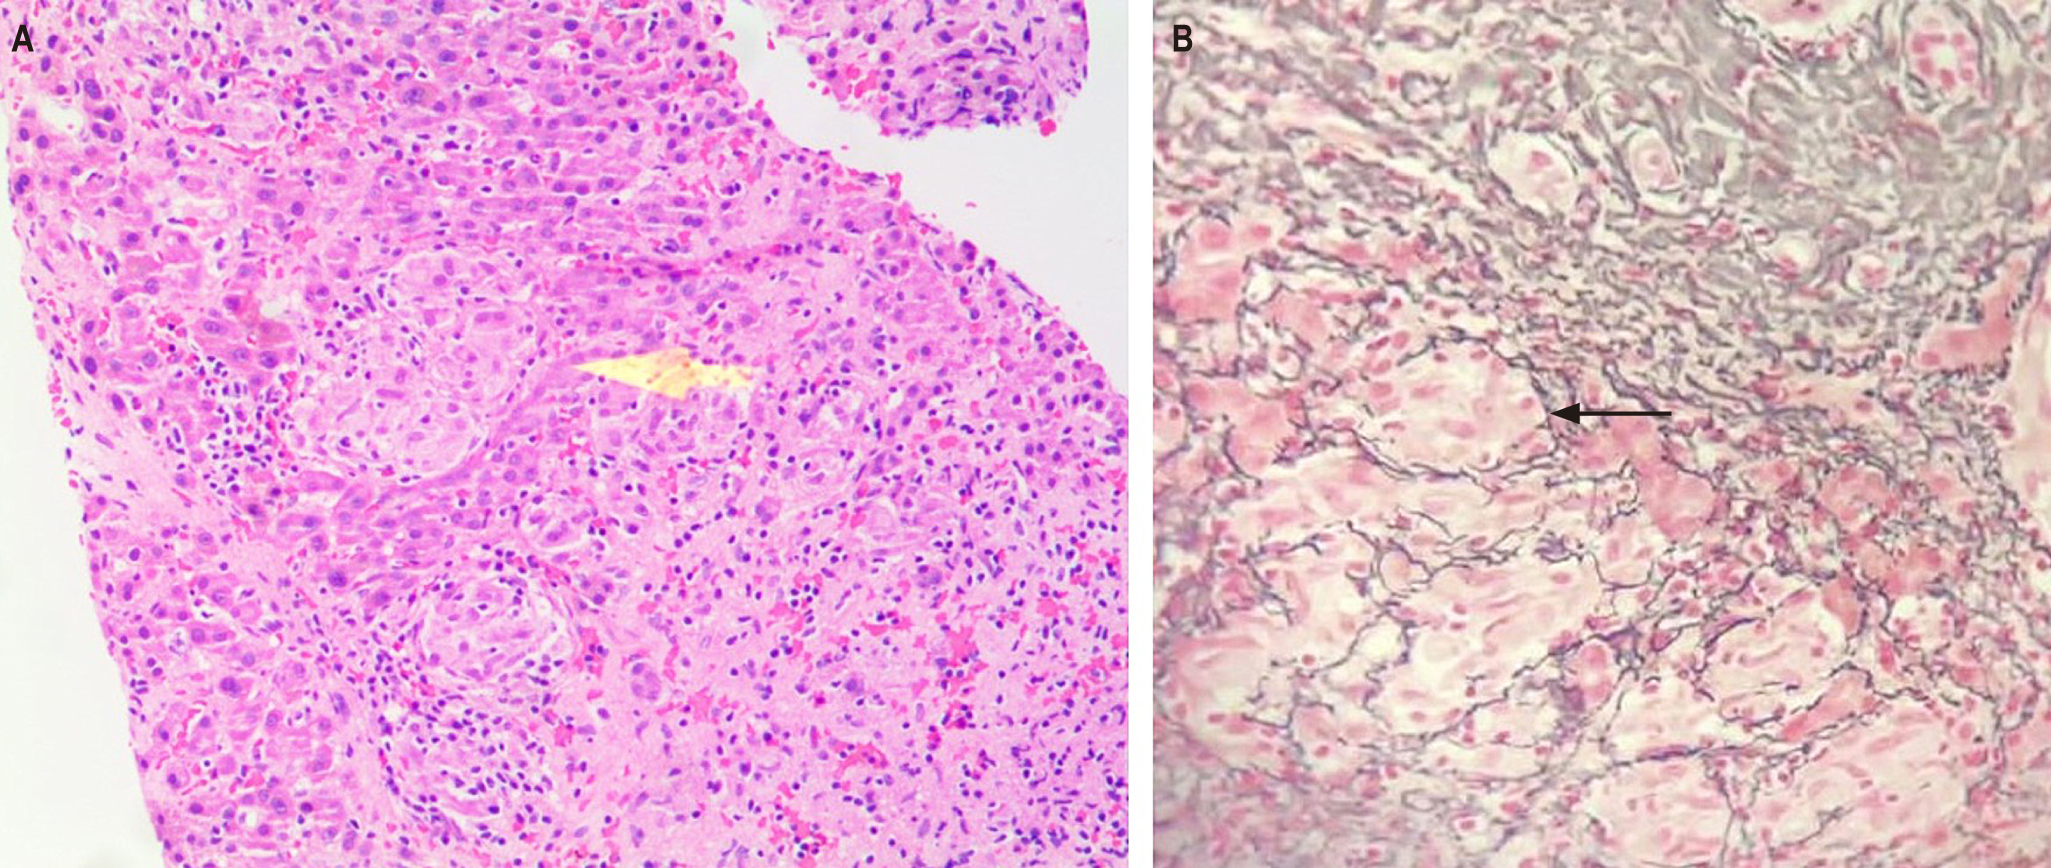 Figure 2. Liver biopsy. A. The sections show the liver parenchyma with numerous small granulomas, which are frequent in the periportal region, consisting of multiple compact aggregates of epithelioid cells with little lymphocytic infiltrate around them, without necrosis (hematoxylin and eosin, 100x); no fungi or mycobacteria were observed in the PAS and Ziehl-Neelsen stains (yellow arrow). B. In the reticulum stain, a cuff of fibrosis is noted around the granulomas (black arrow). The morphological findings correspond to granulomatous hepatitis (silver salt stain, 40x). Courtesy of Dr. María Mercedes Mendoza, pathologist, Hospital Militar Central. Bogotá, Colombia.